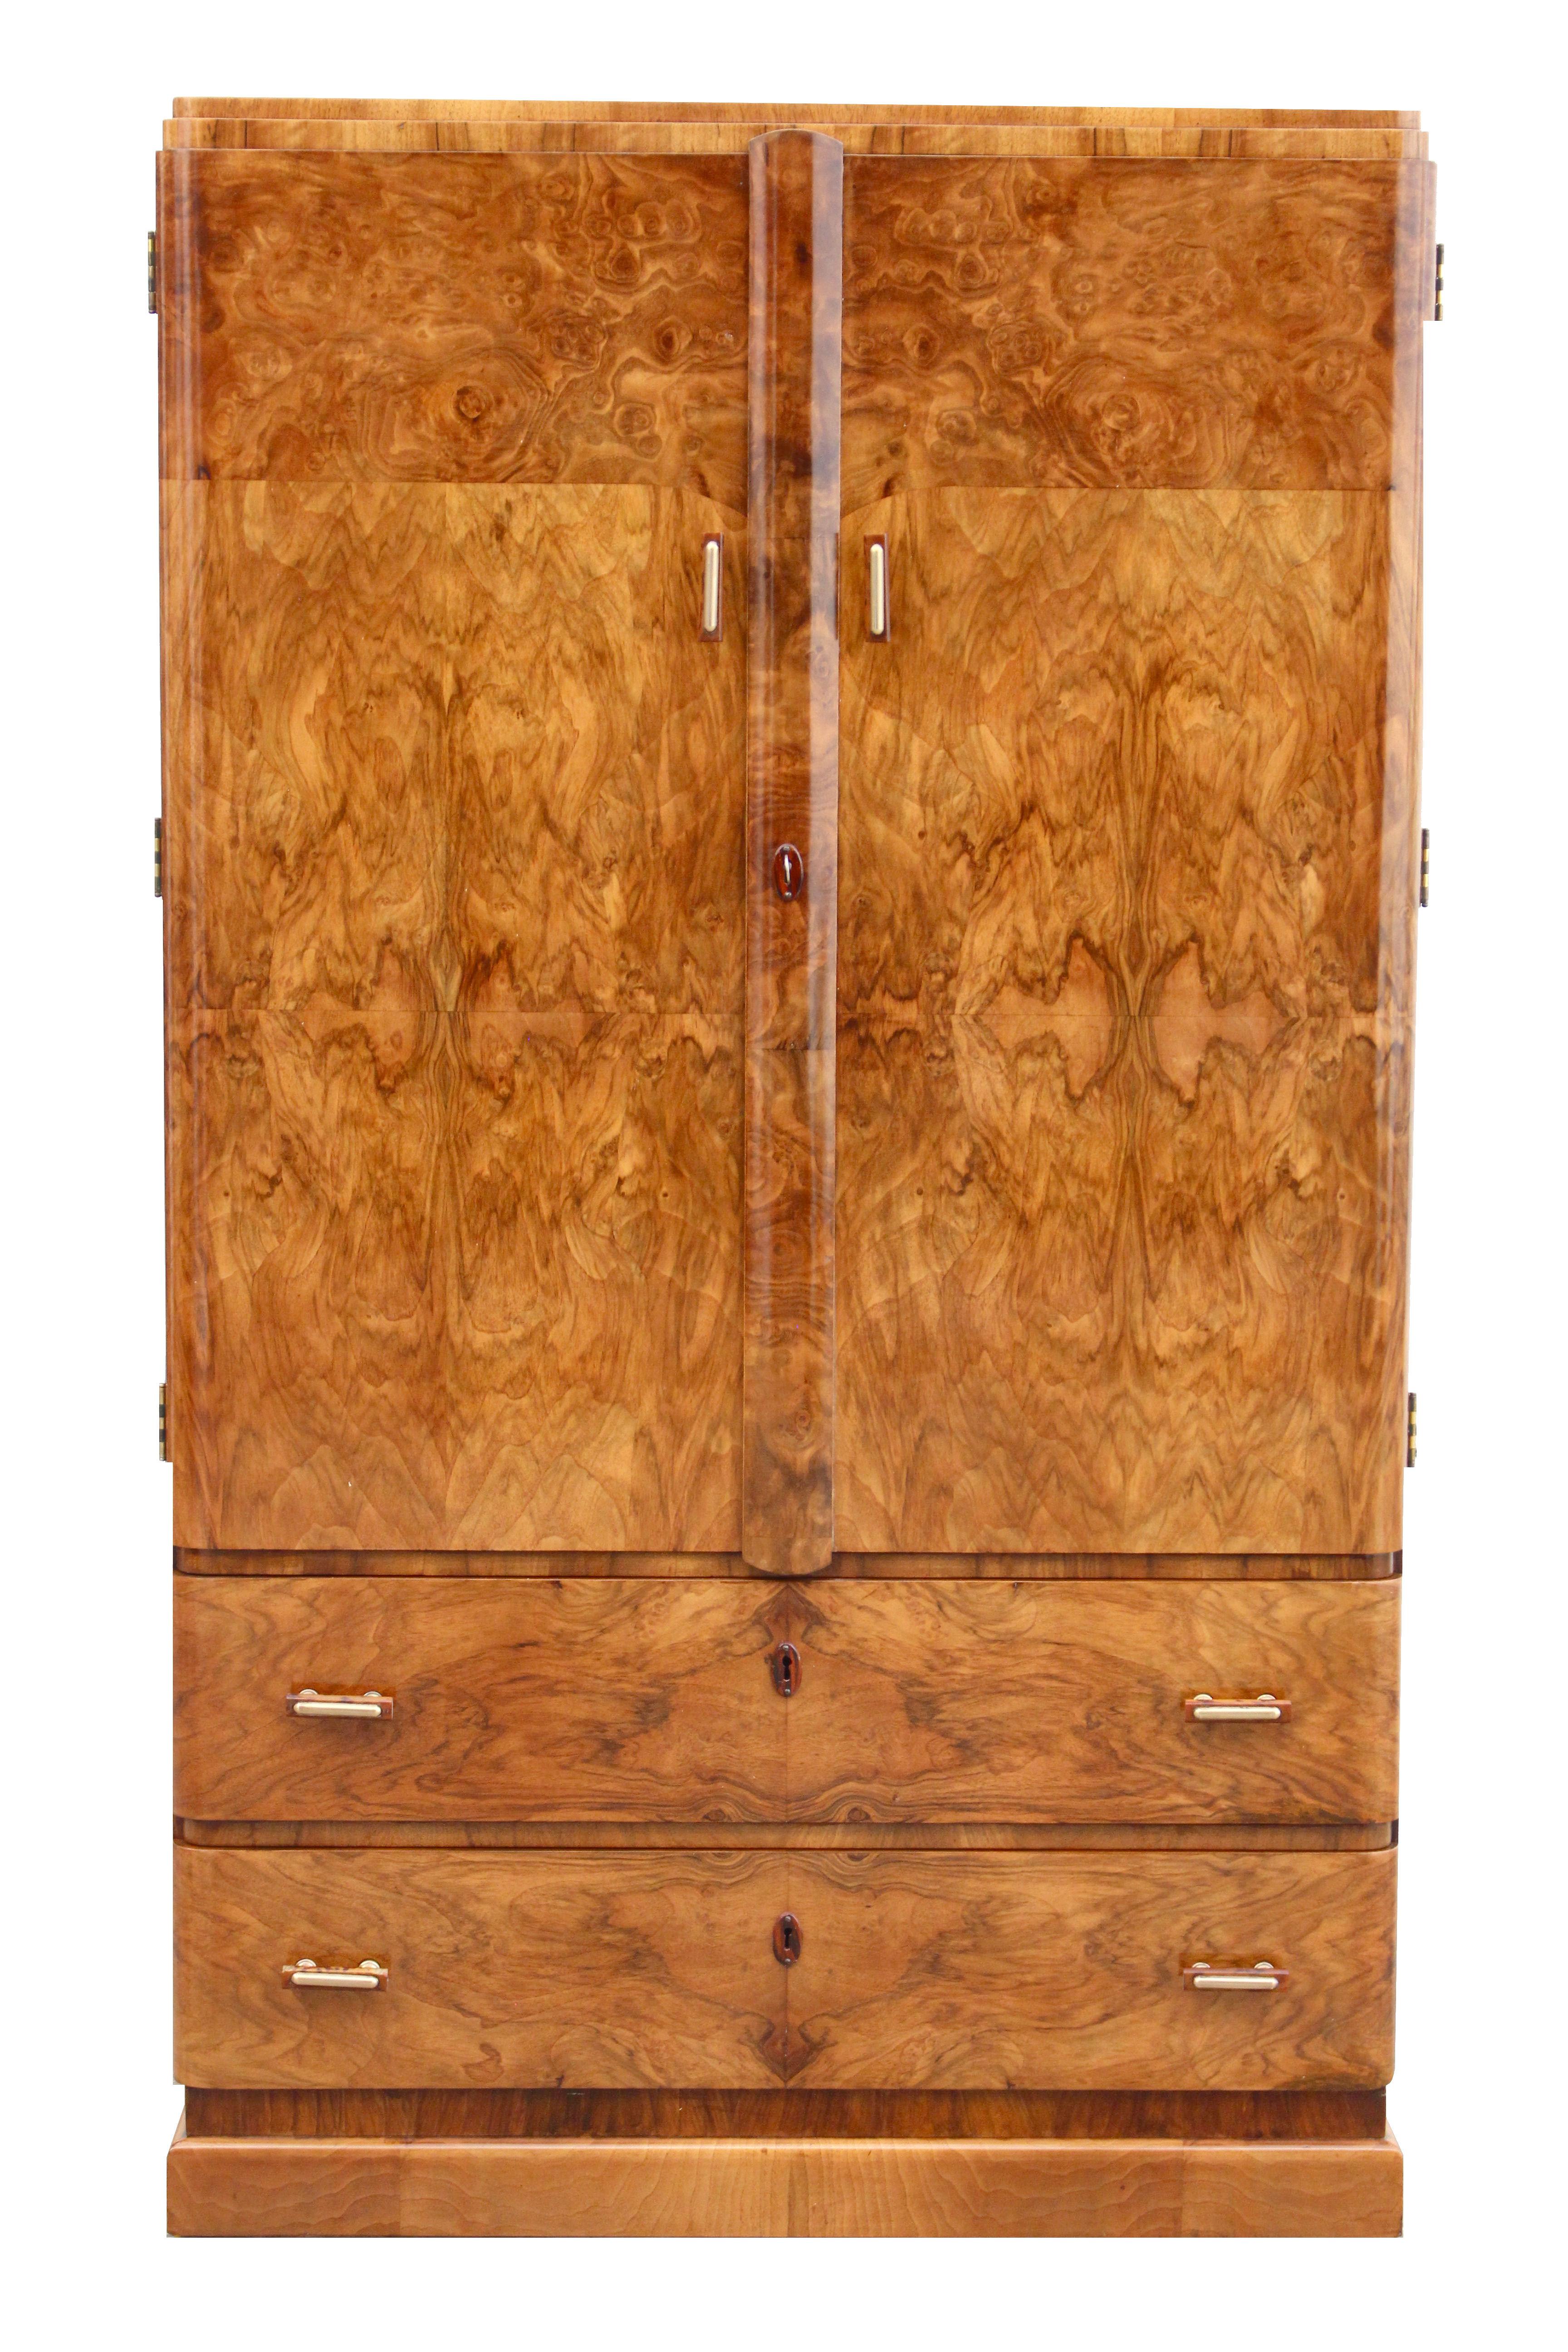 A real treasure from the 1930s is this Art Deco tallboy. On first viewing this piece one can't not be impressed by the obvious quality and size, made from solid mahogany for the carcass with a heavily figured walnut book paged veneers to the